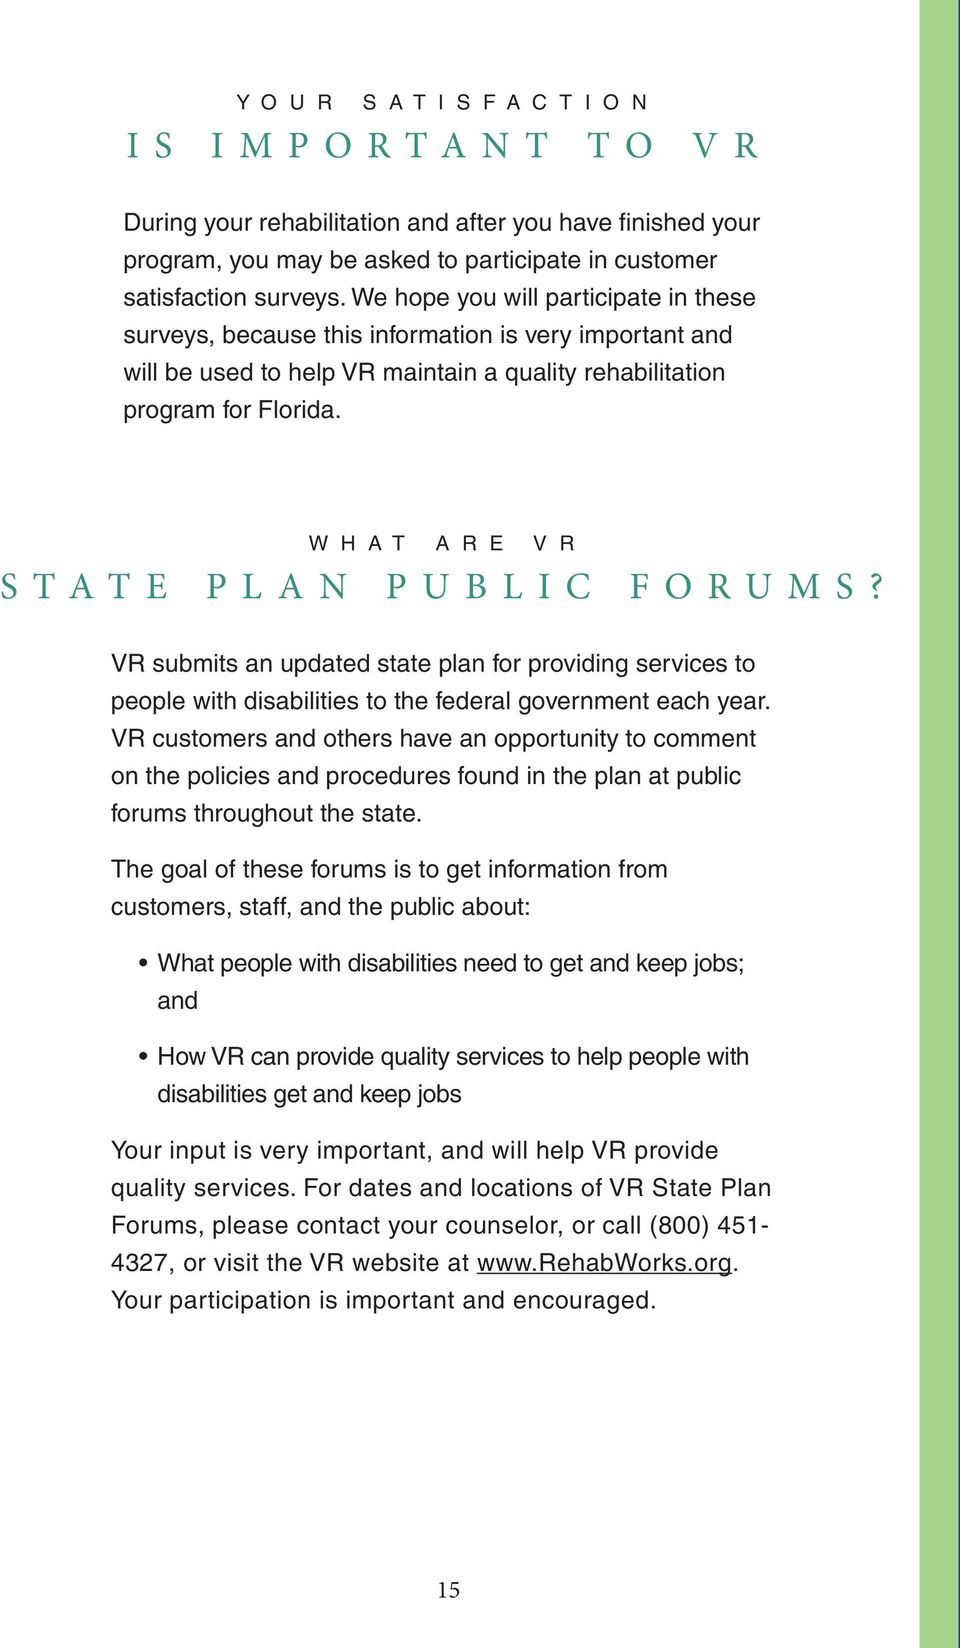 W H A T A R E V R STATE PLAN PUBLIC FORUMS? VR submits an updated state plan for providing services to people with disabilities to the federal government each year.